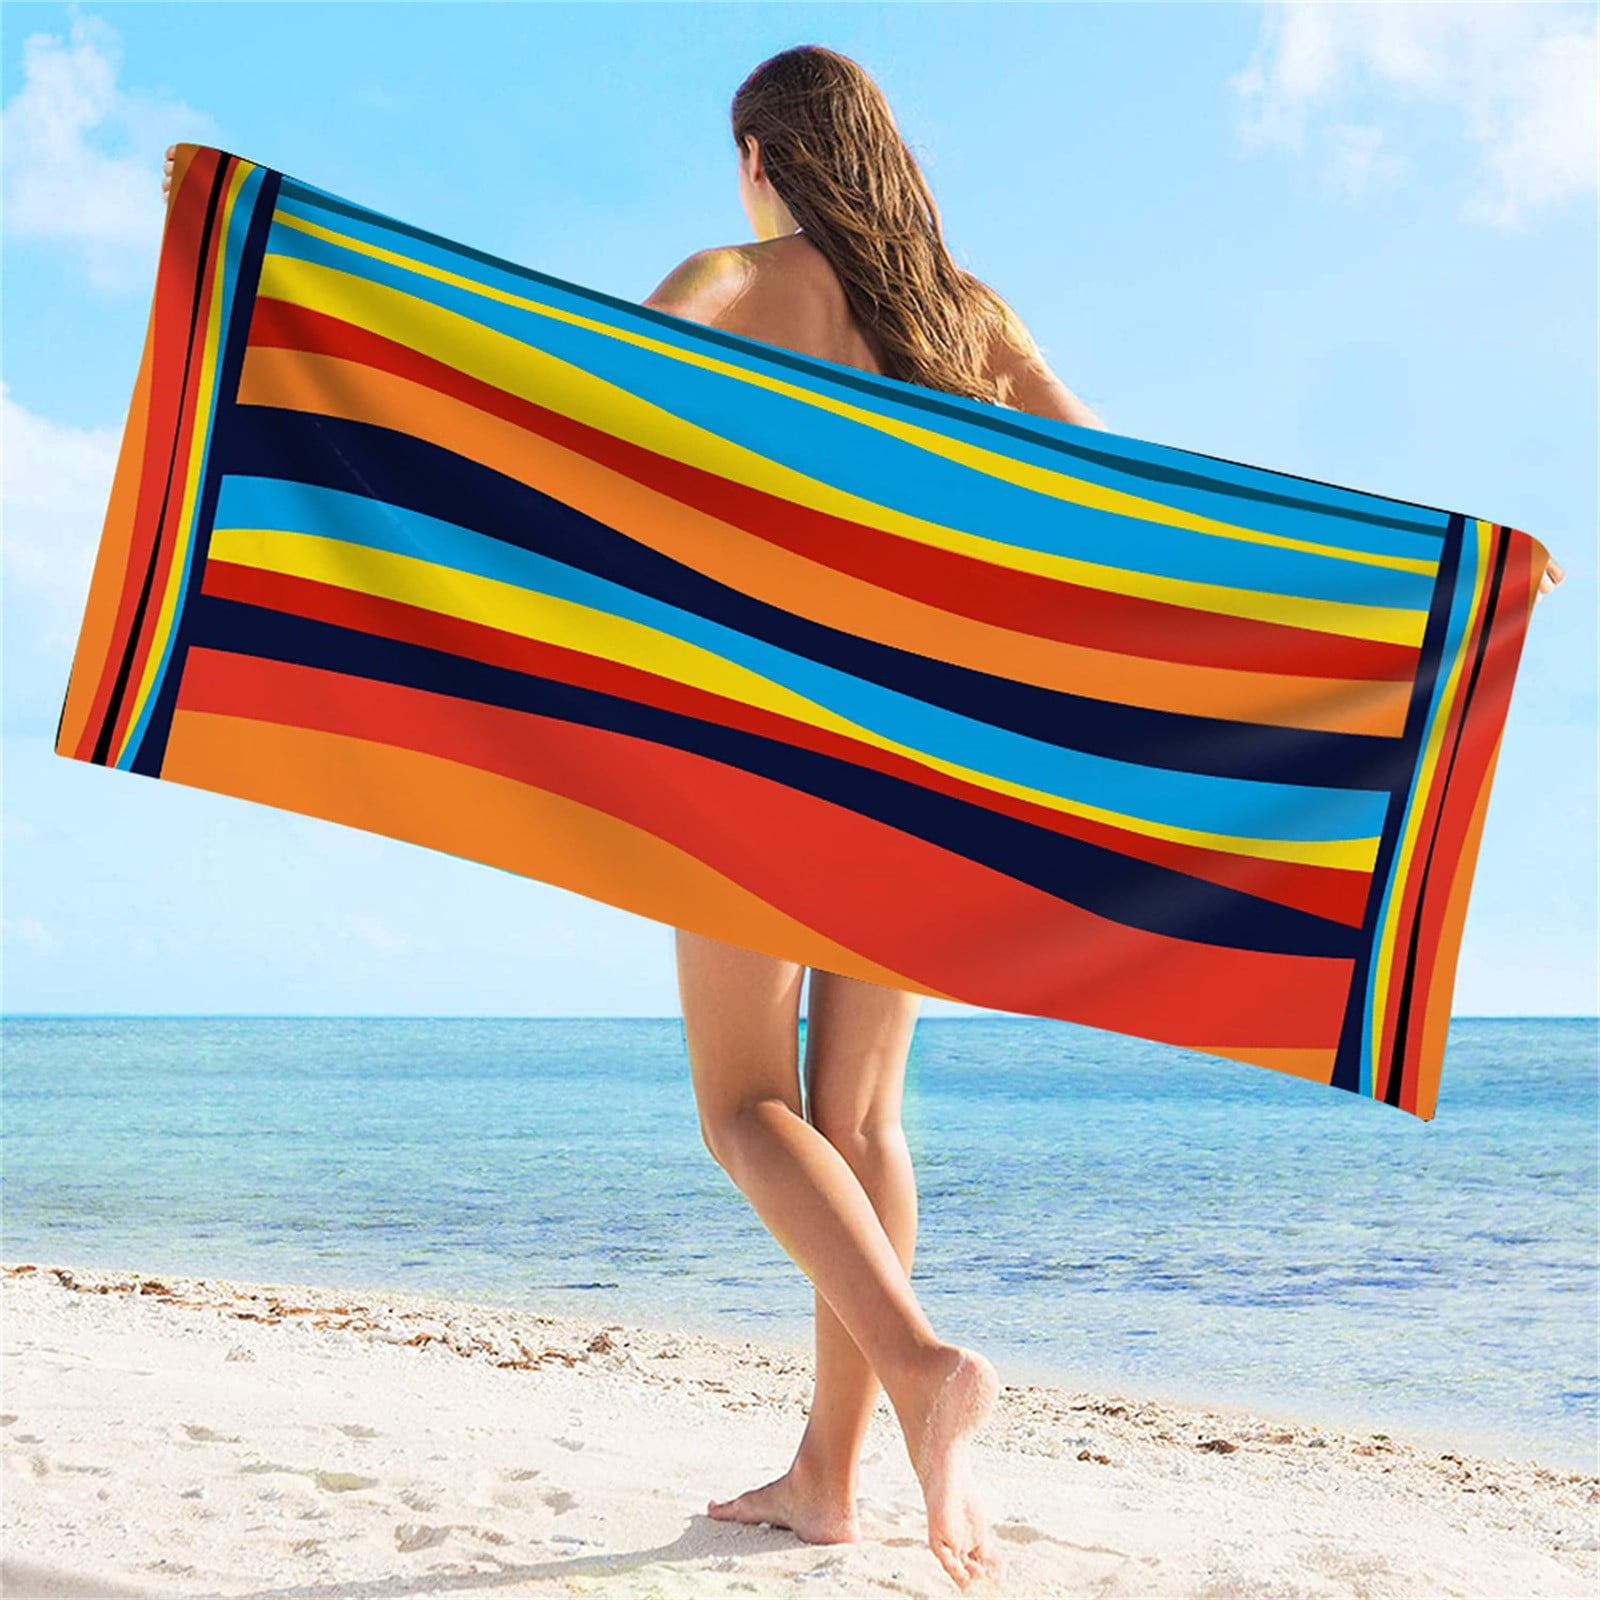 Bornbay Cotton Oversized Beach Towel - Extra Large 40x70 Plush Thick Pool Towel, XL Fluffy Stripe Blue Beach Towels for Adults Mens Women (White